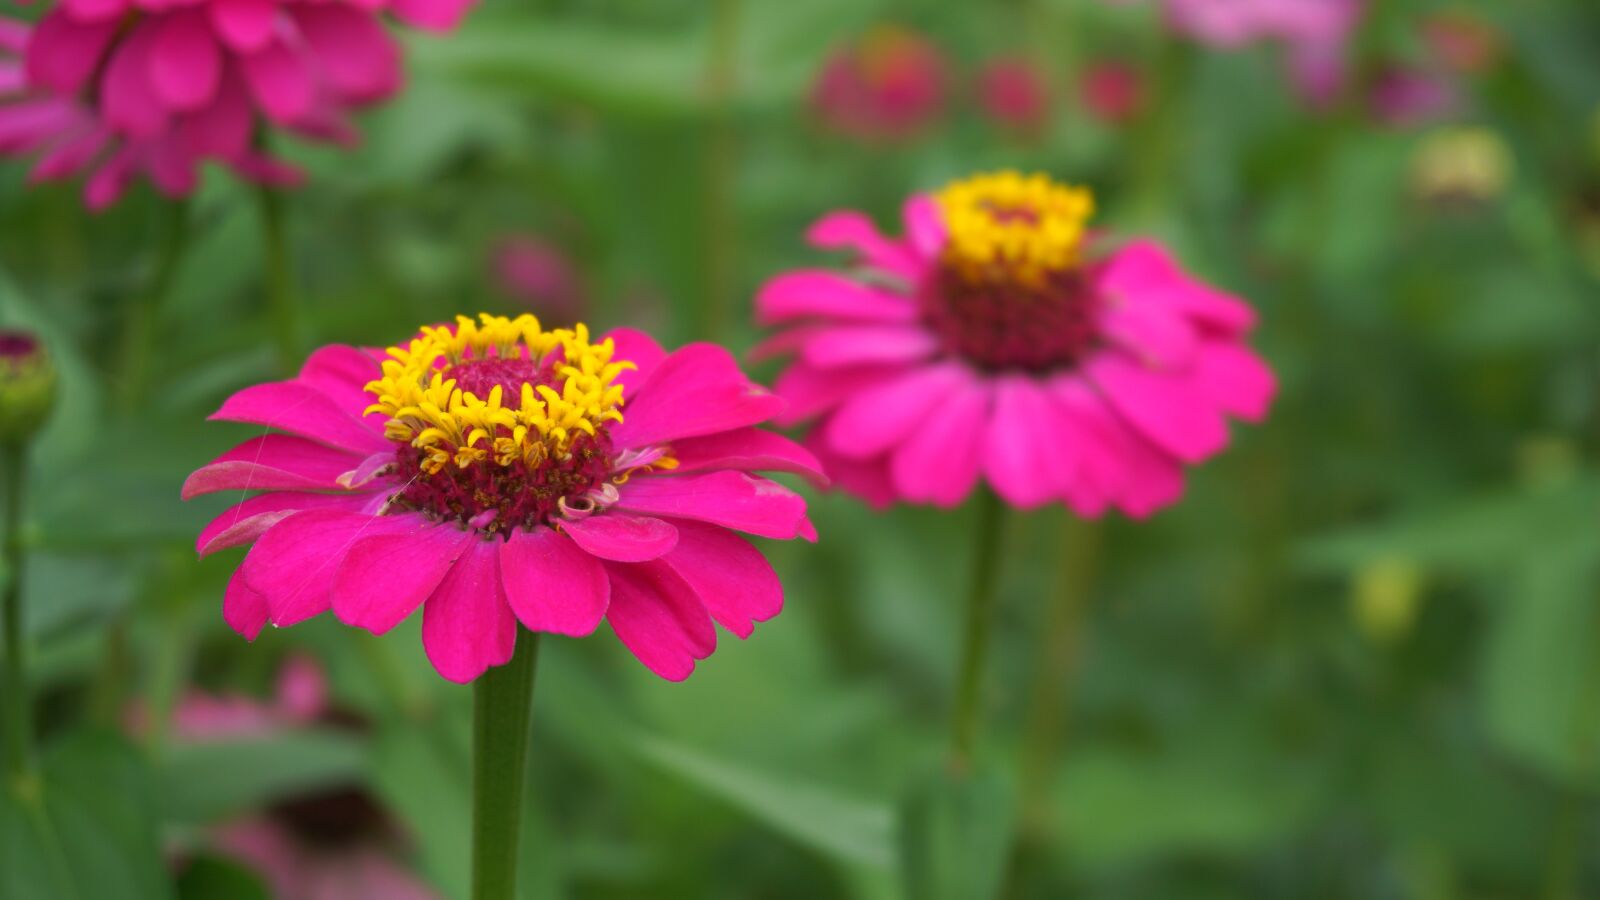 Sony a5100 sample photo. Flowers, nature, plants photography